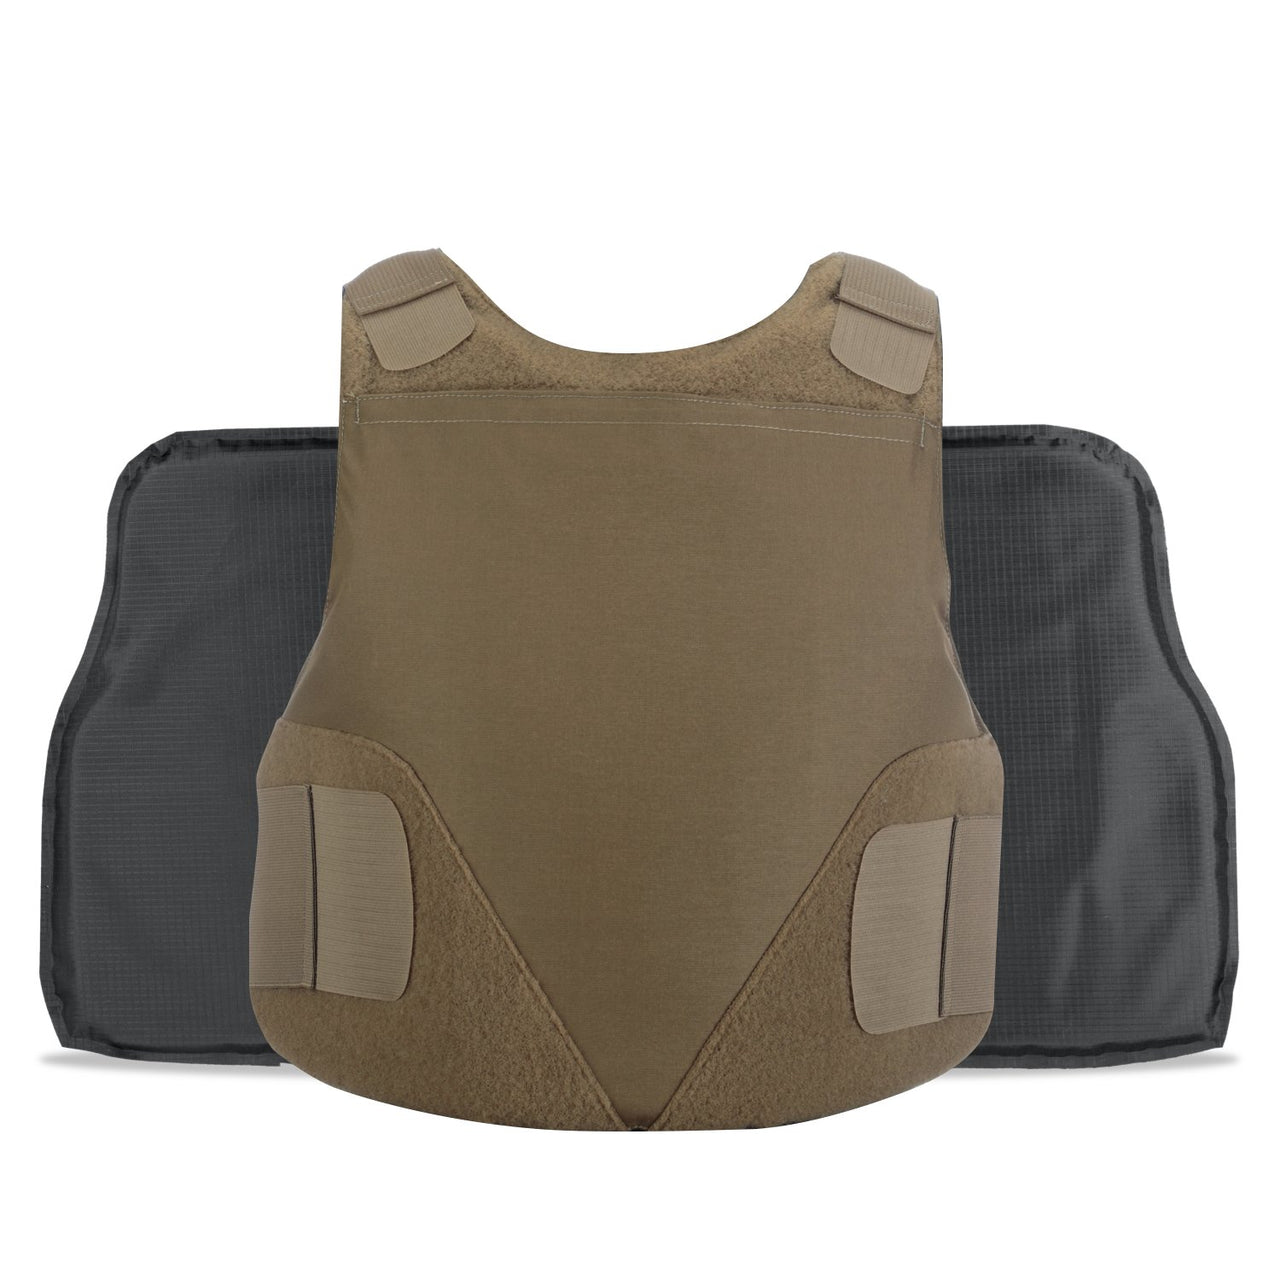 A Body Armor Direct All American Concealable Enhanced Multi-Threat Vest with two pockets.